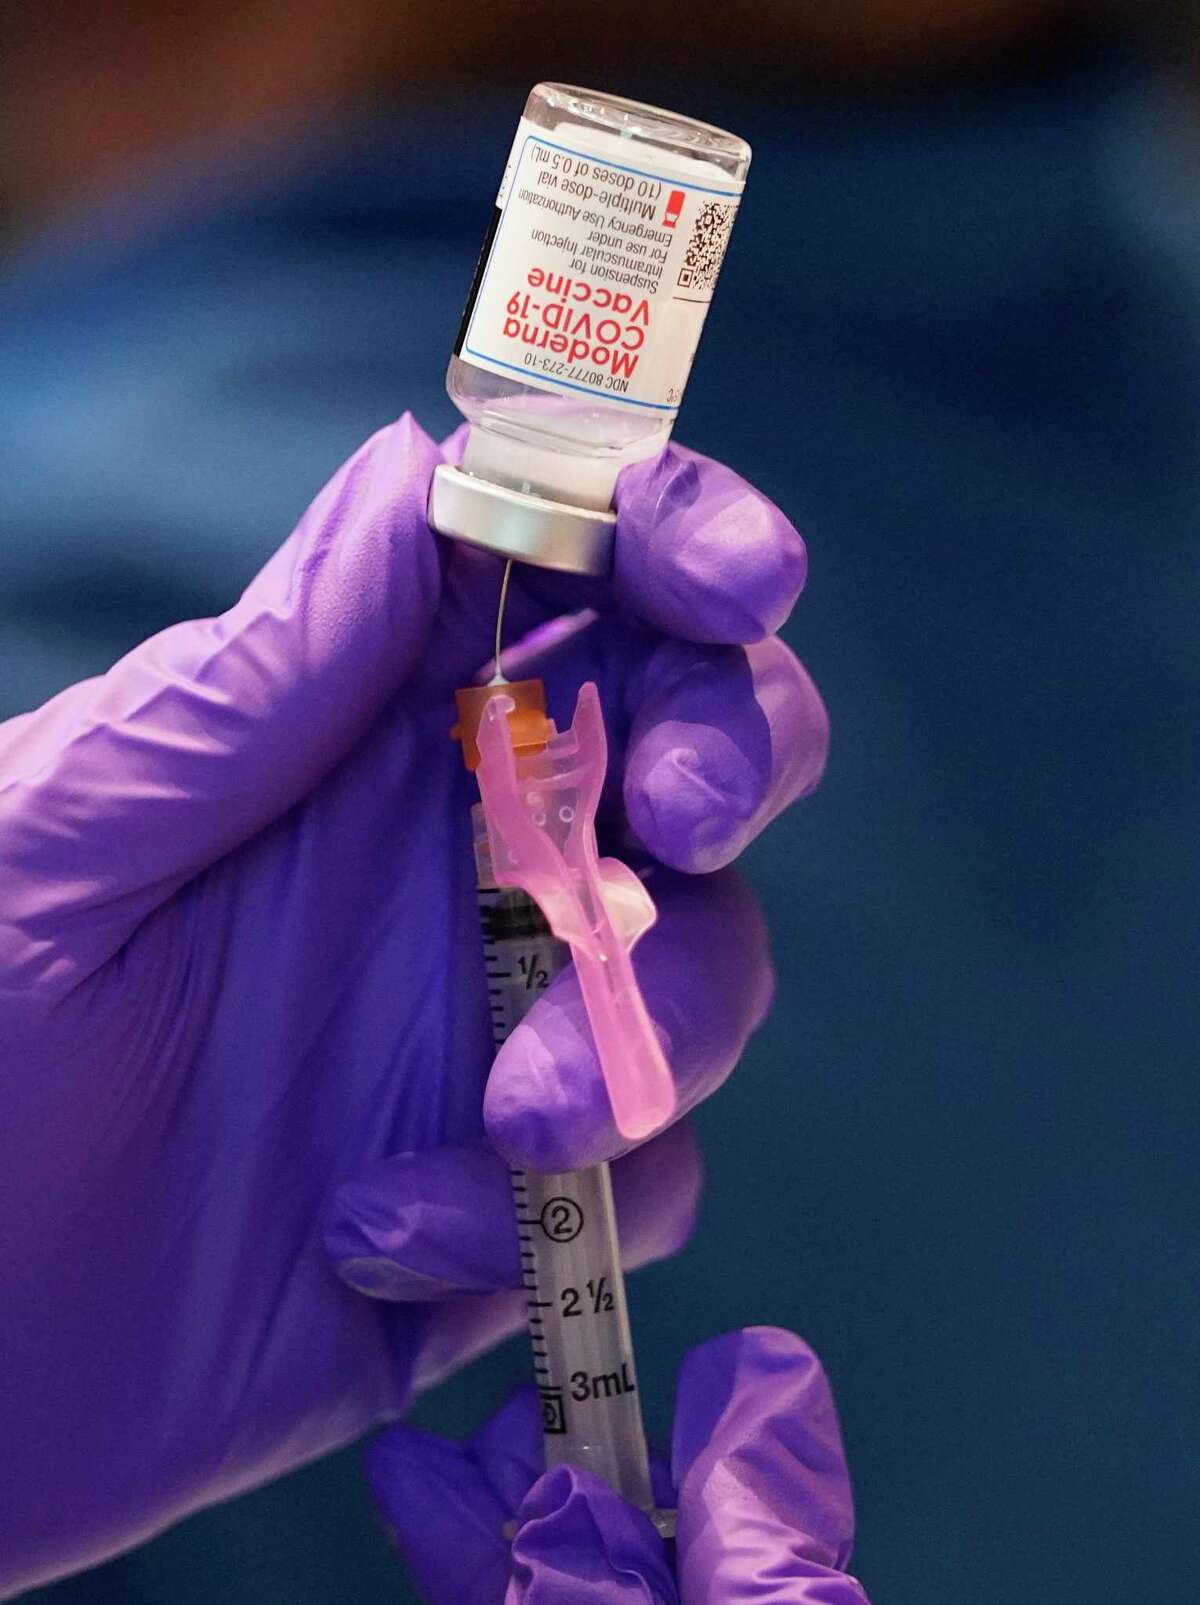 A Moderna COVID-19 vaccination is prepared at McGovern Medical School at UTHealth Wednesday, Dec. 30, 2020 in Houston.